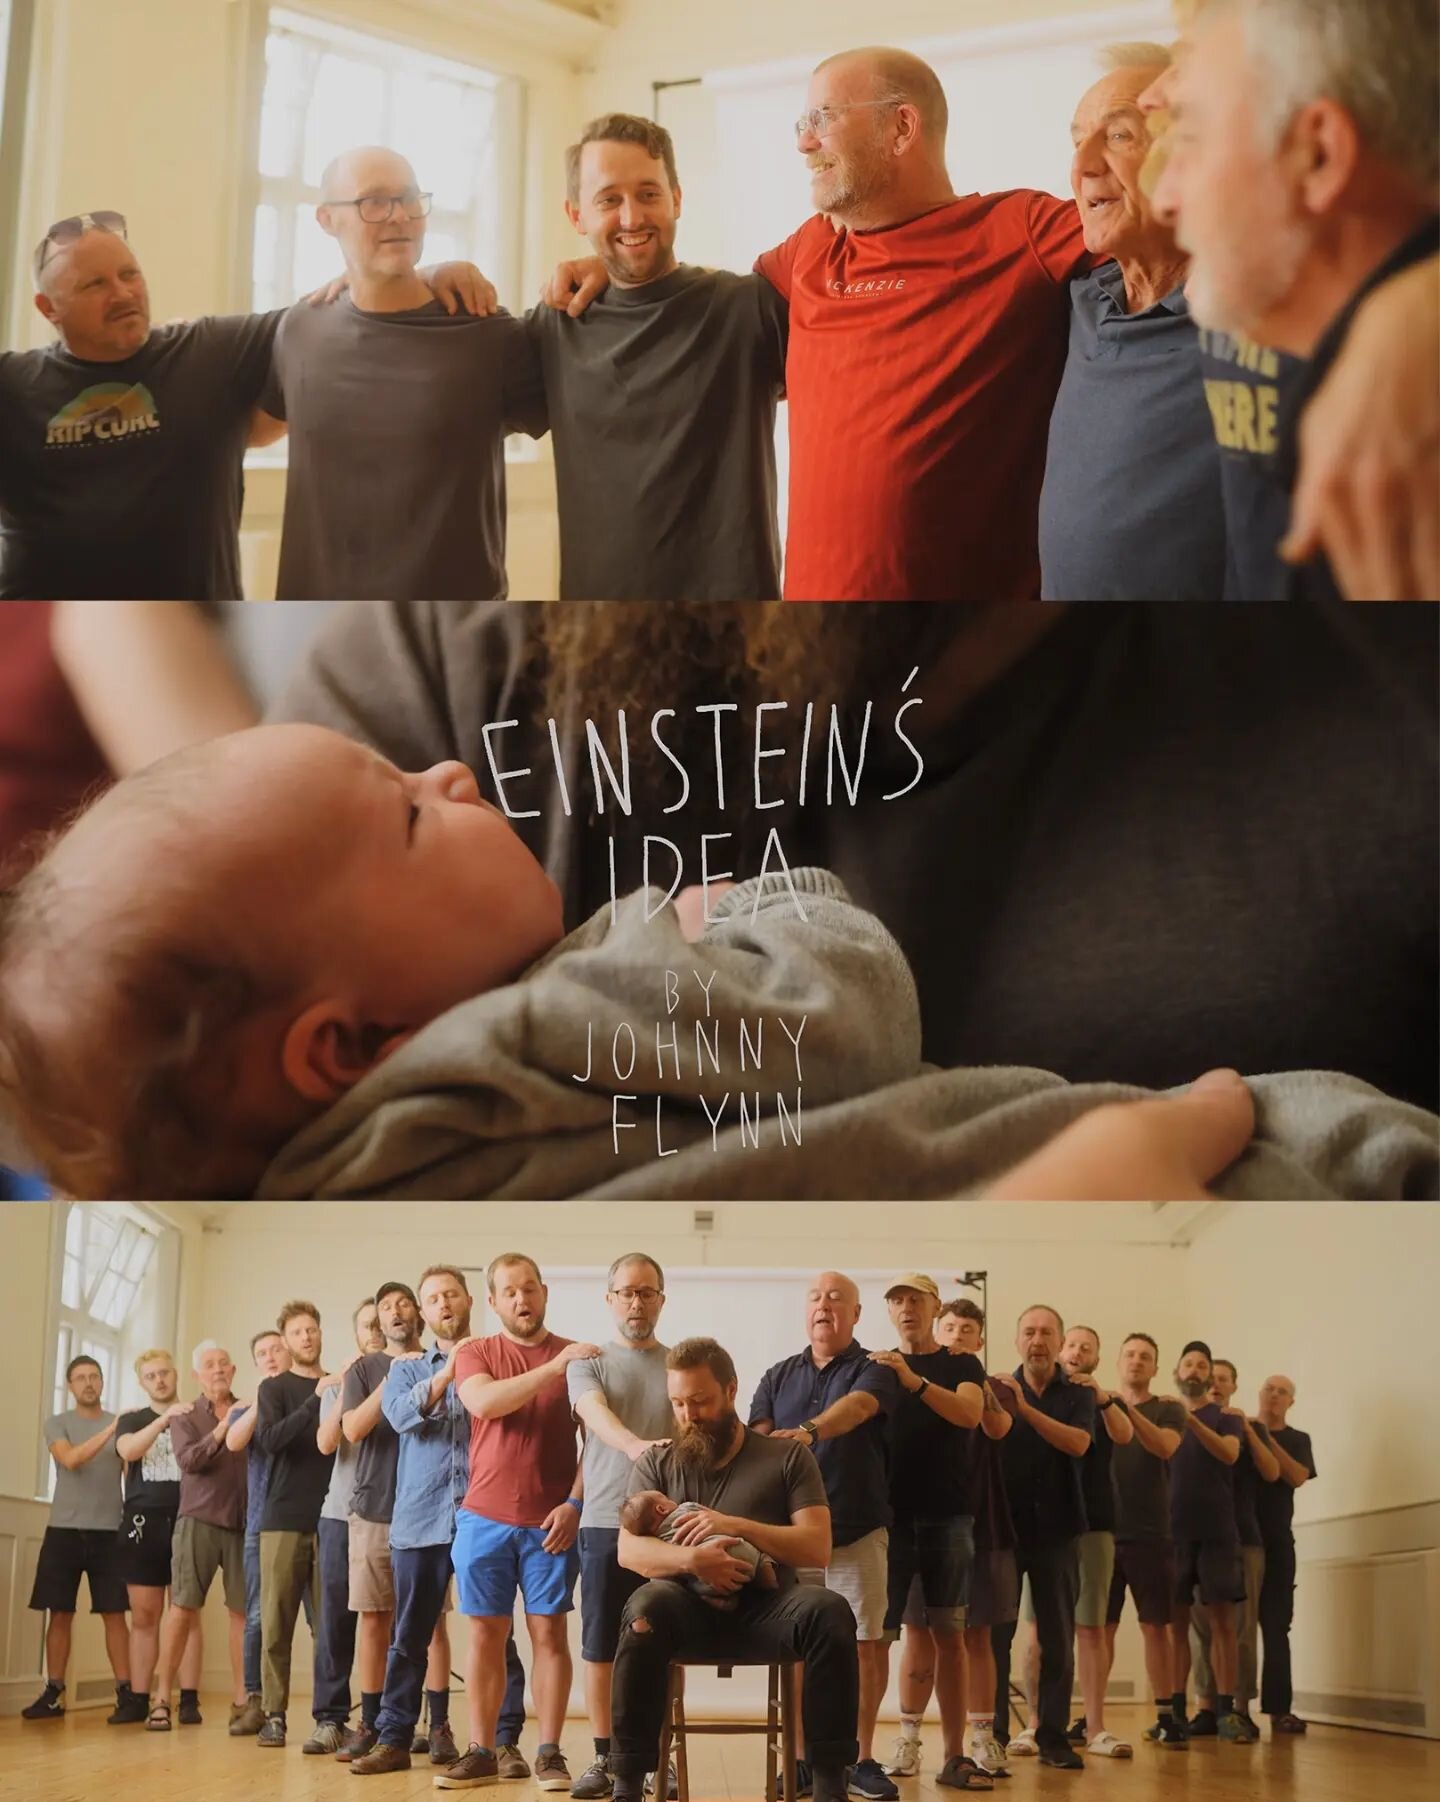 Einstein's Idea, featuring Men Are Singing.
**
A few months ago, Seamas presented me with a few concepts for music videos, and one of them stood out to me as something truly remarkable. The opportunity to capture the emotions of these men and produce